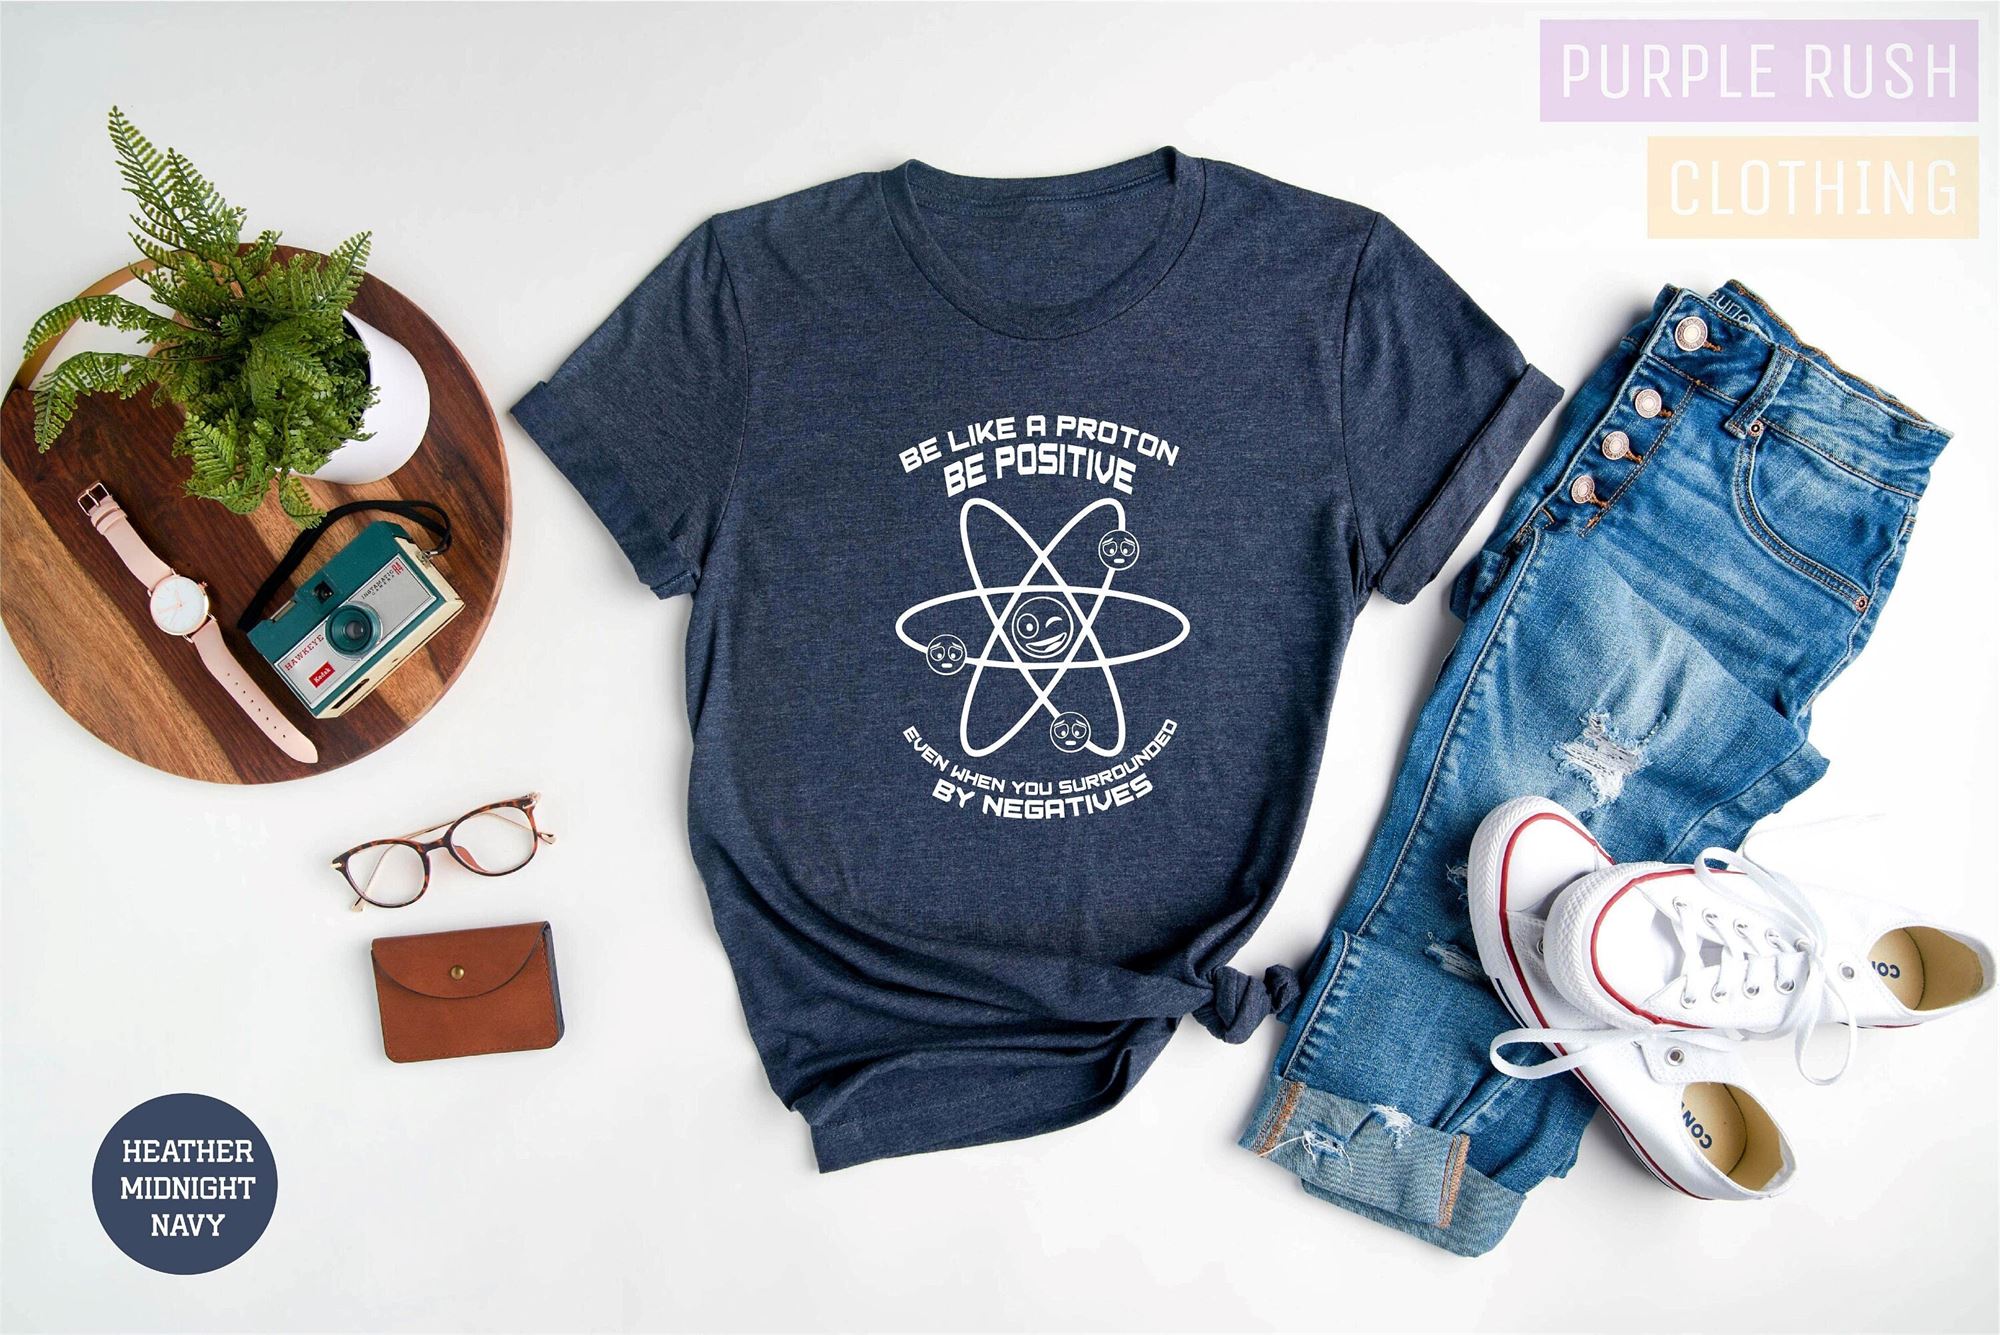 Great Be Like A Proton Shirt Teacher Shirt Positive Shirt Funny Science Shirt Chemistry Shirt Physics Shirt Stay Positive Gift For Her 